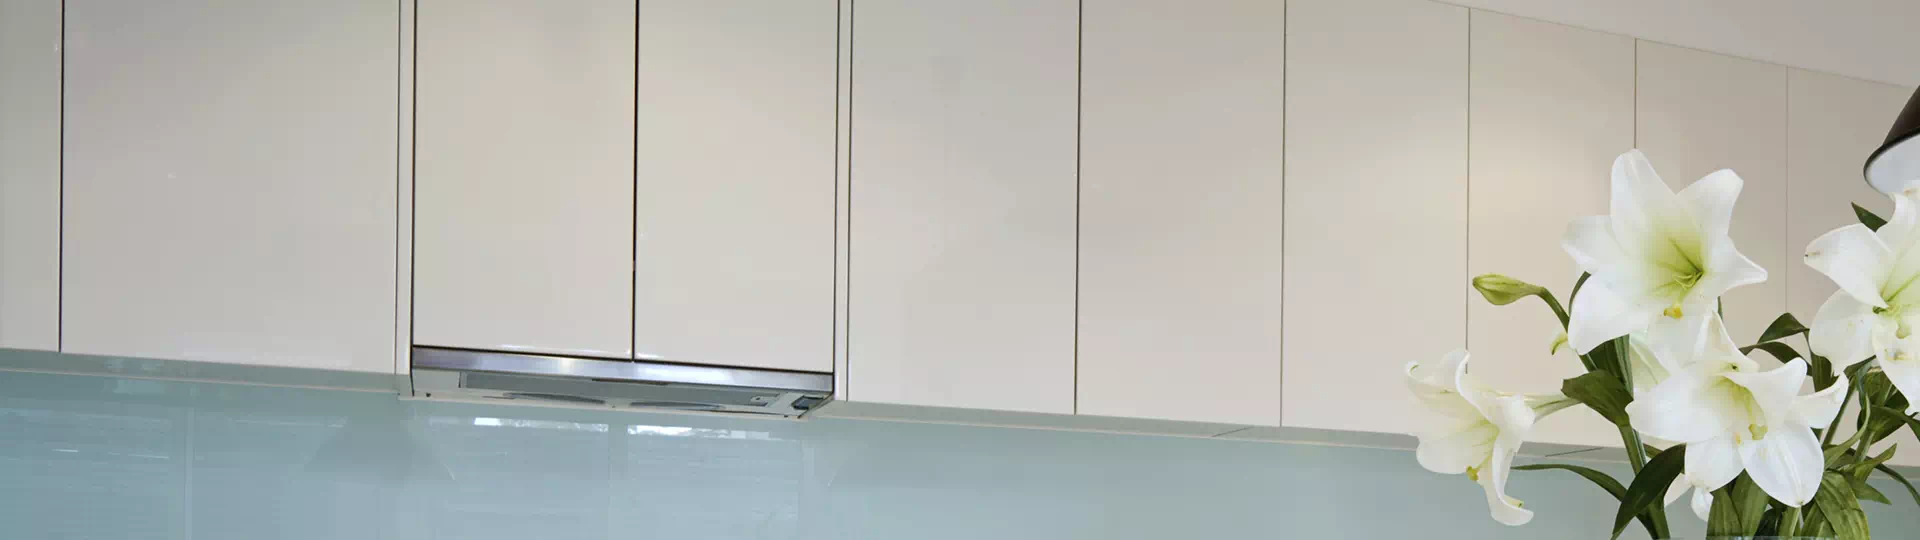 How To Clean Laminate Cabinets Simple, How To Clean Plastic Kitchen Cabinets